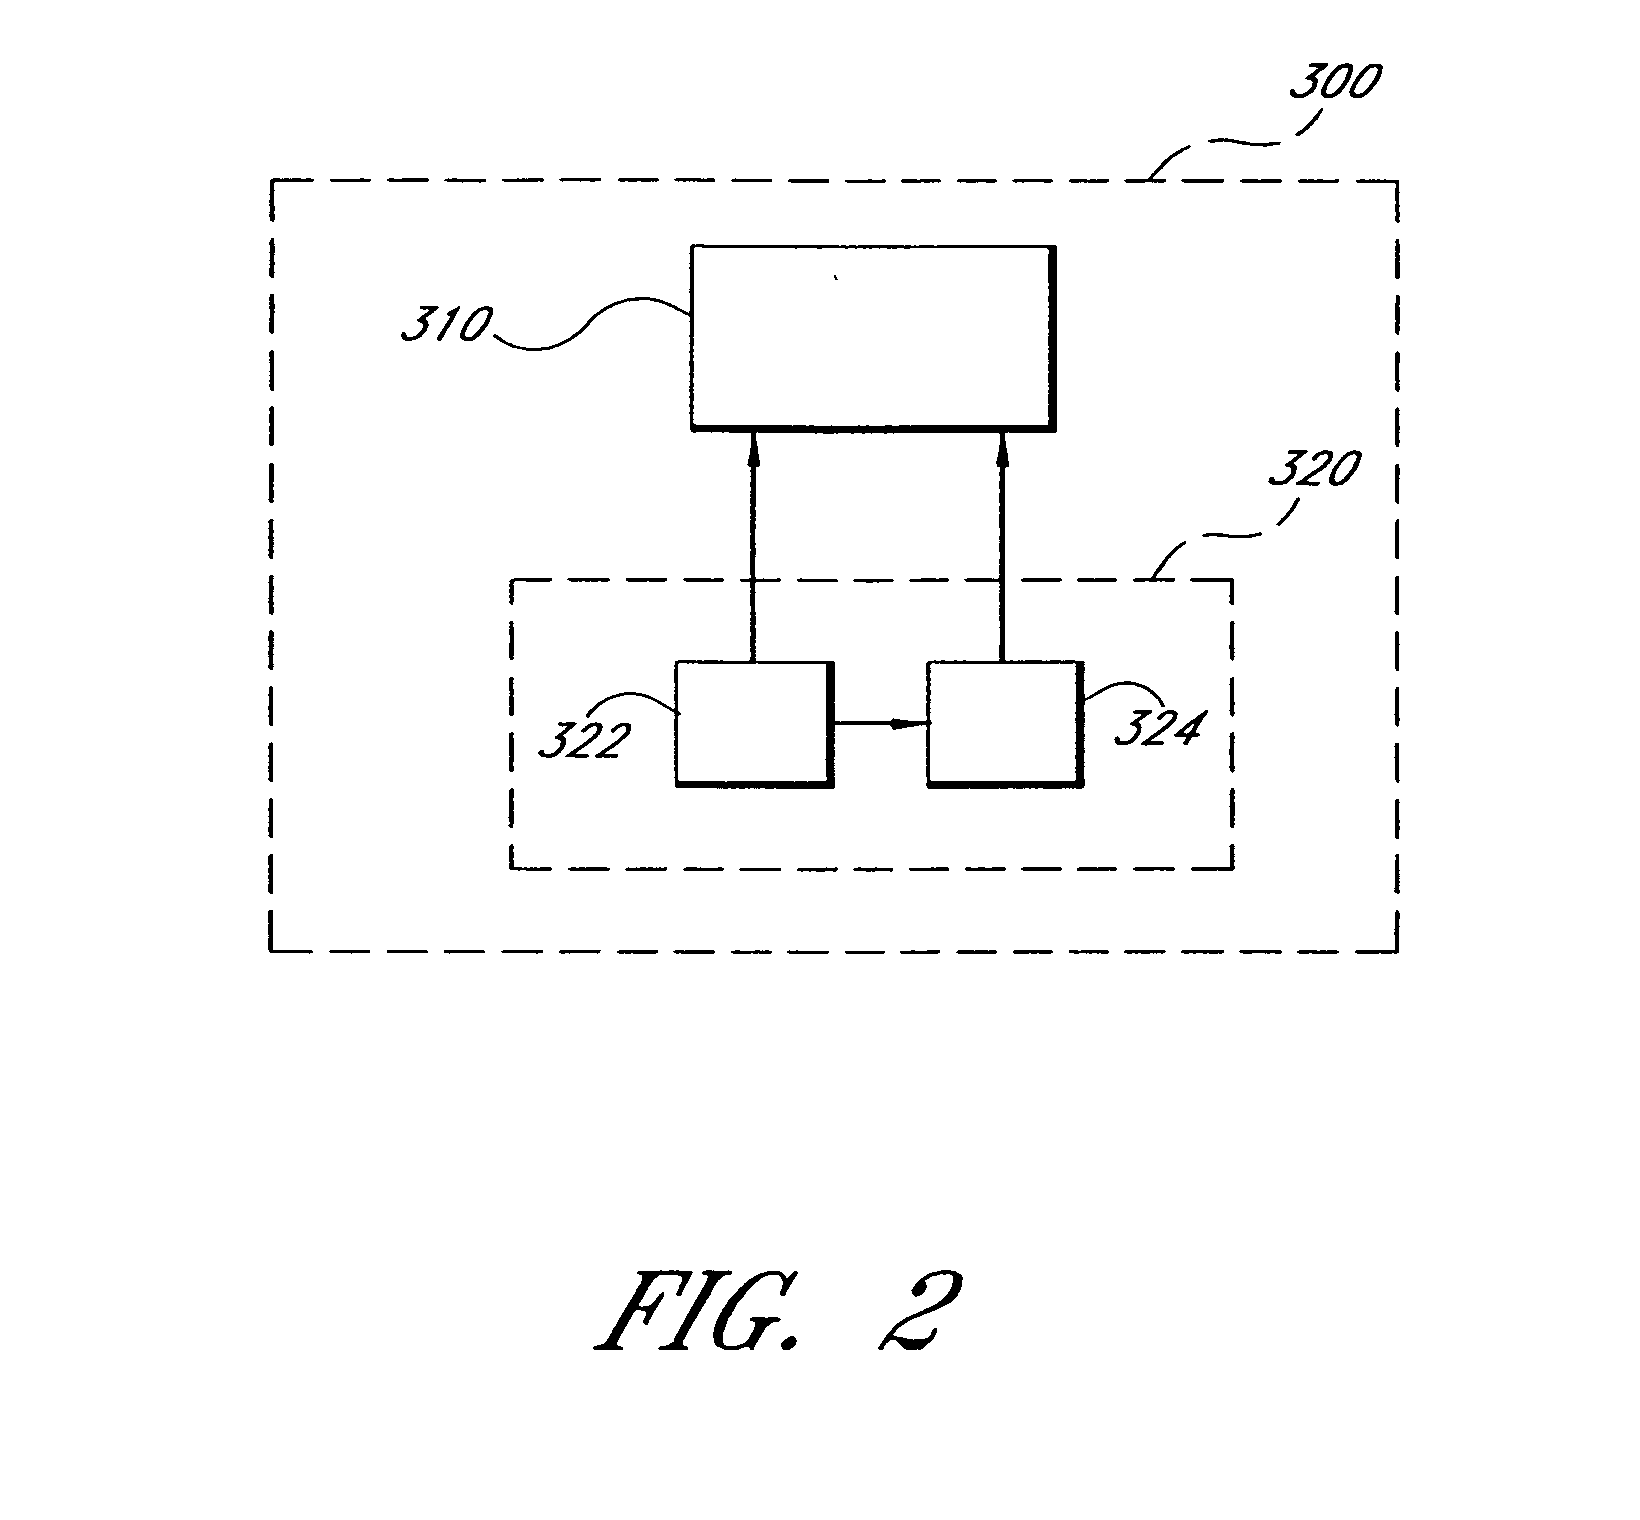 Method and apparatus for material processing